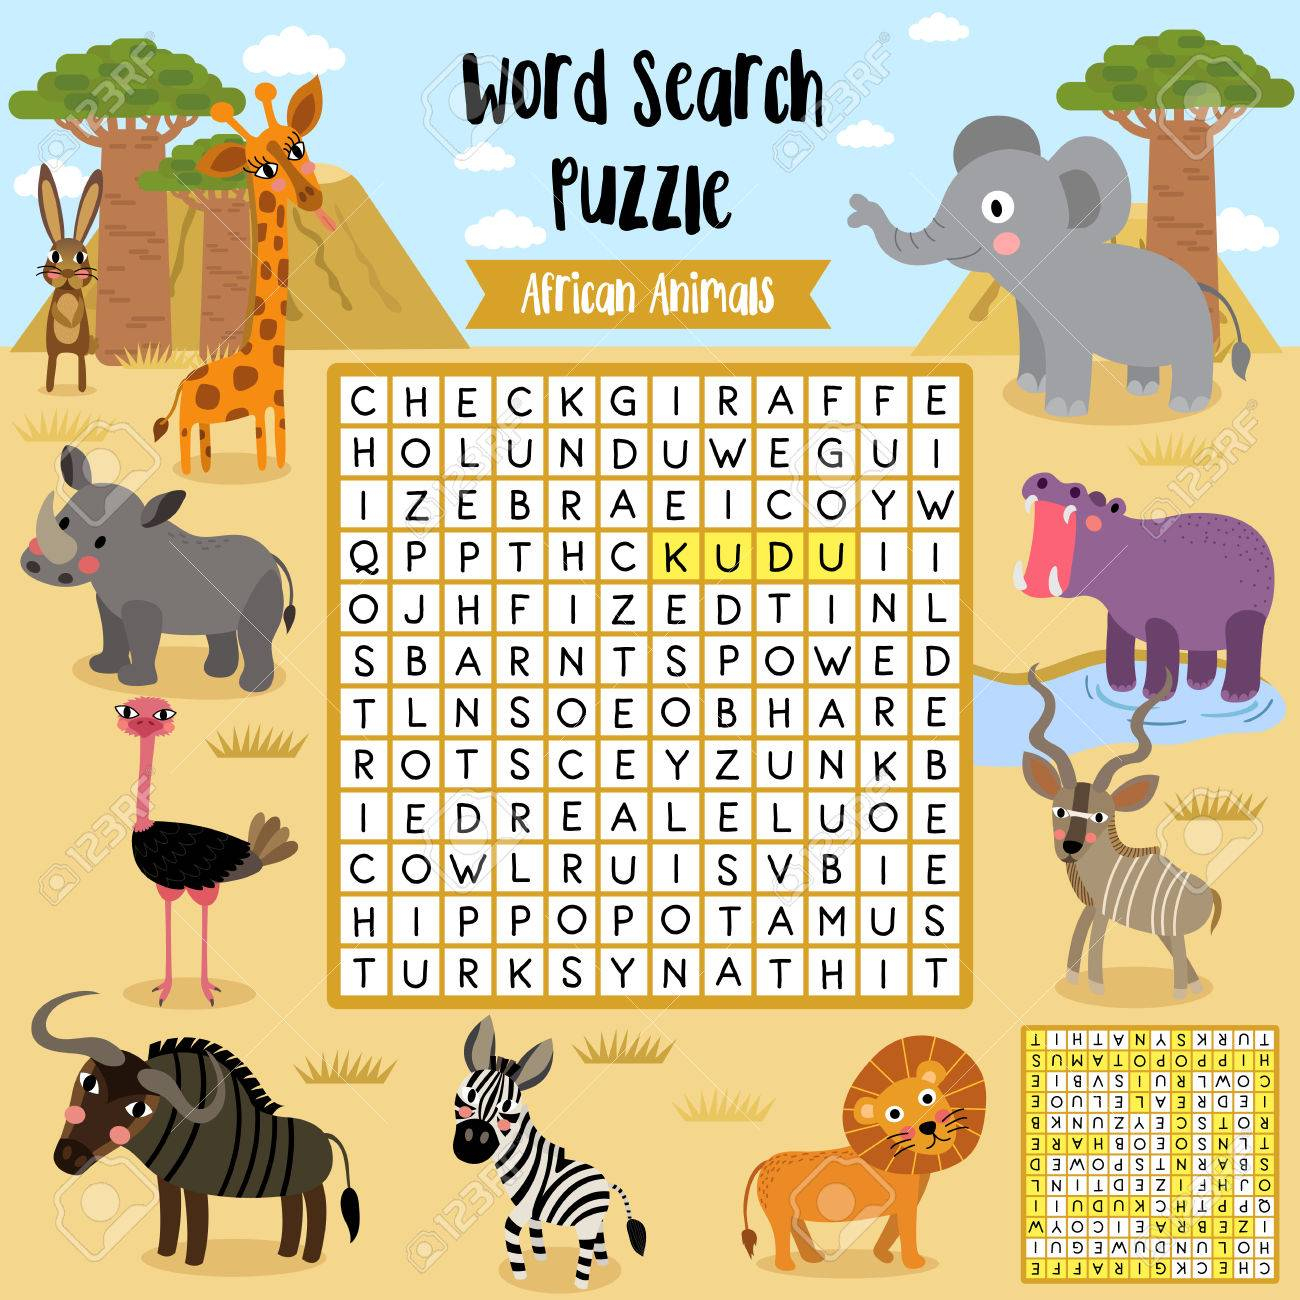 Words Search Puzzle Game Of African Animals For Preschool Kids - Printable Animal Puzzle